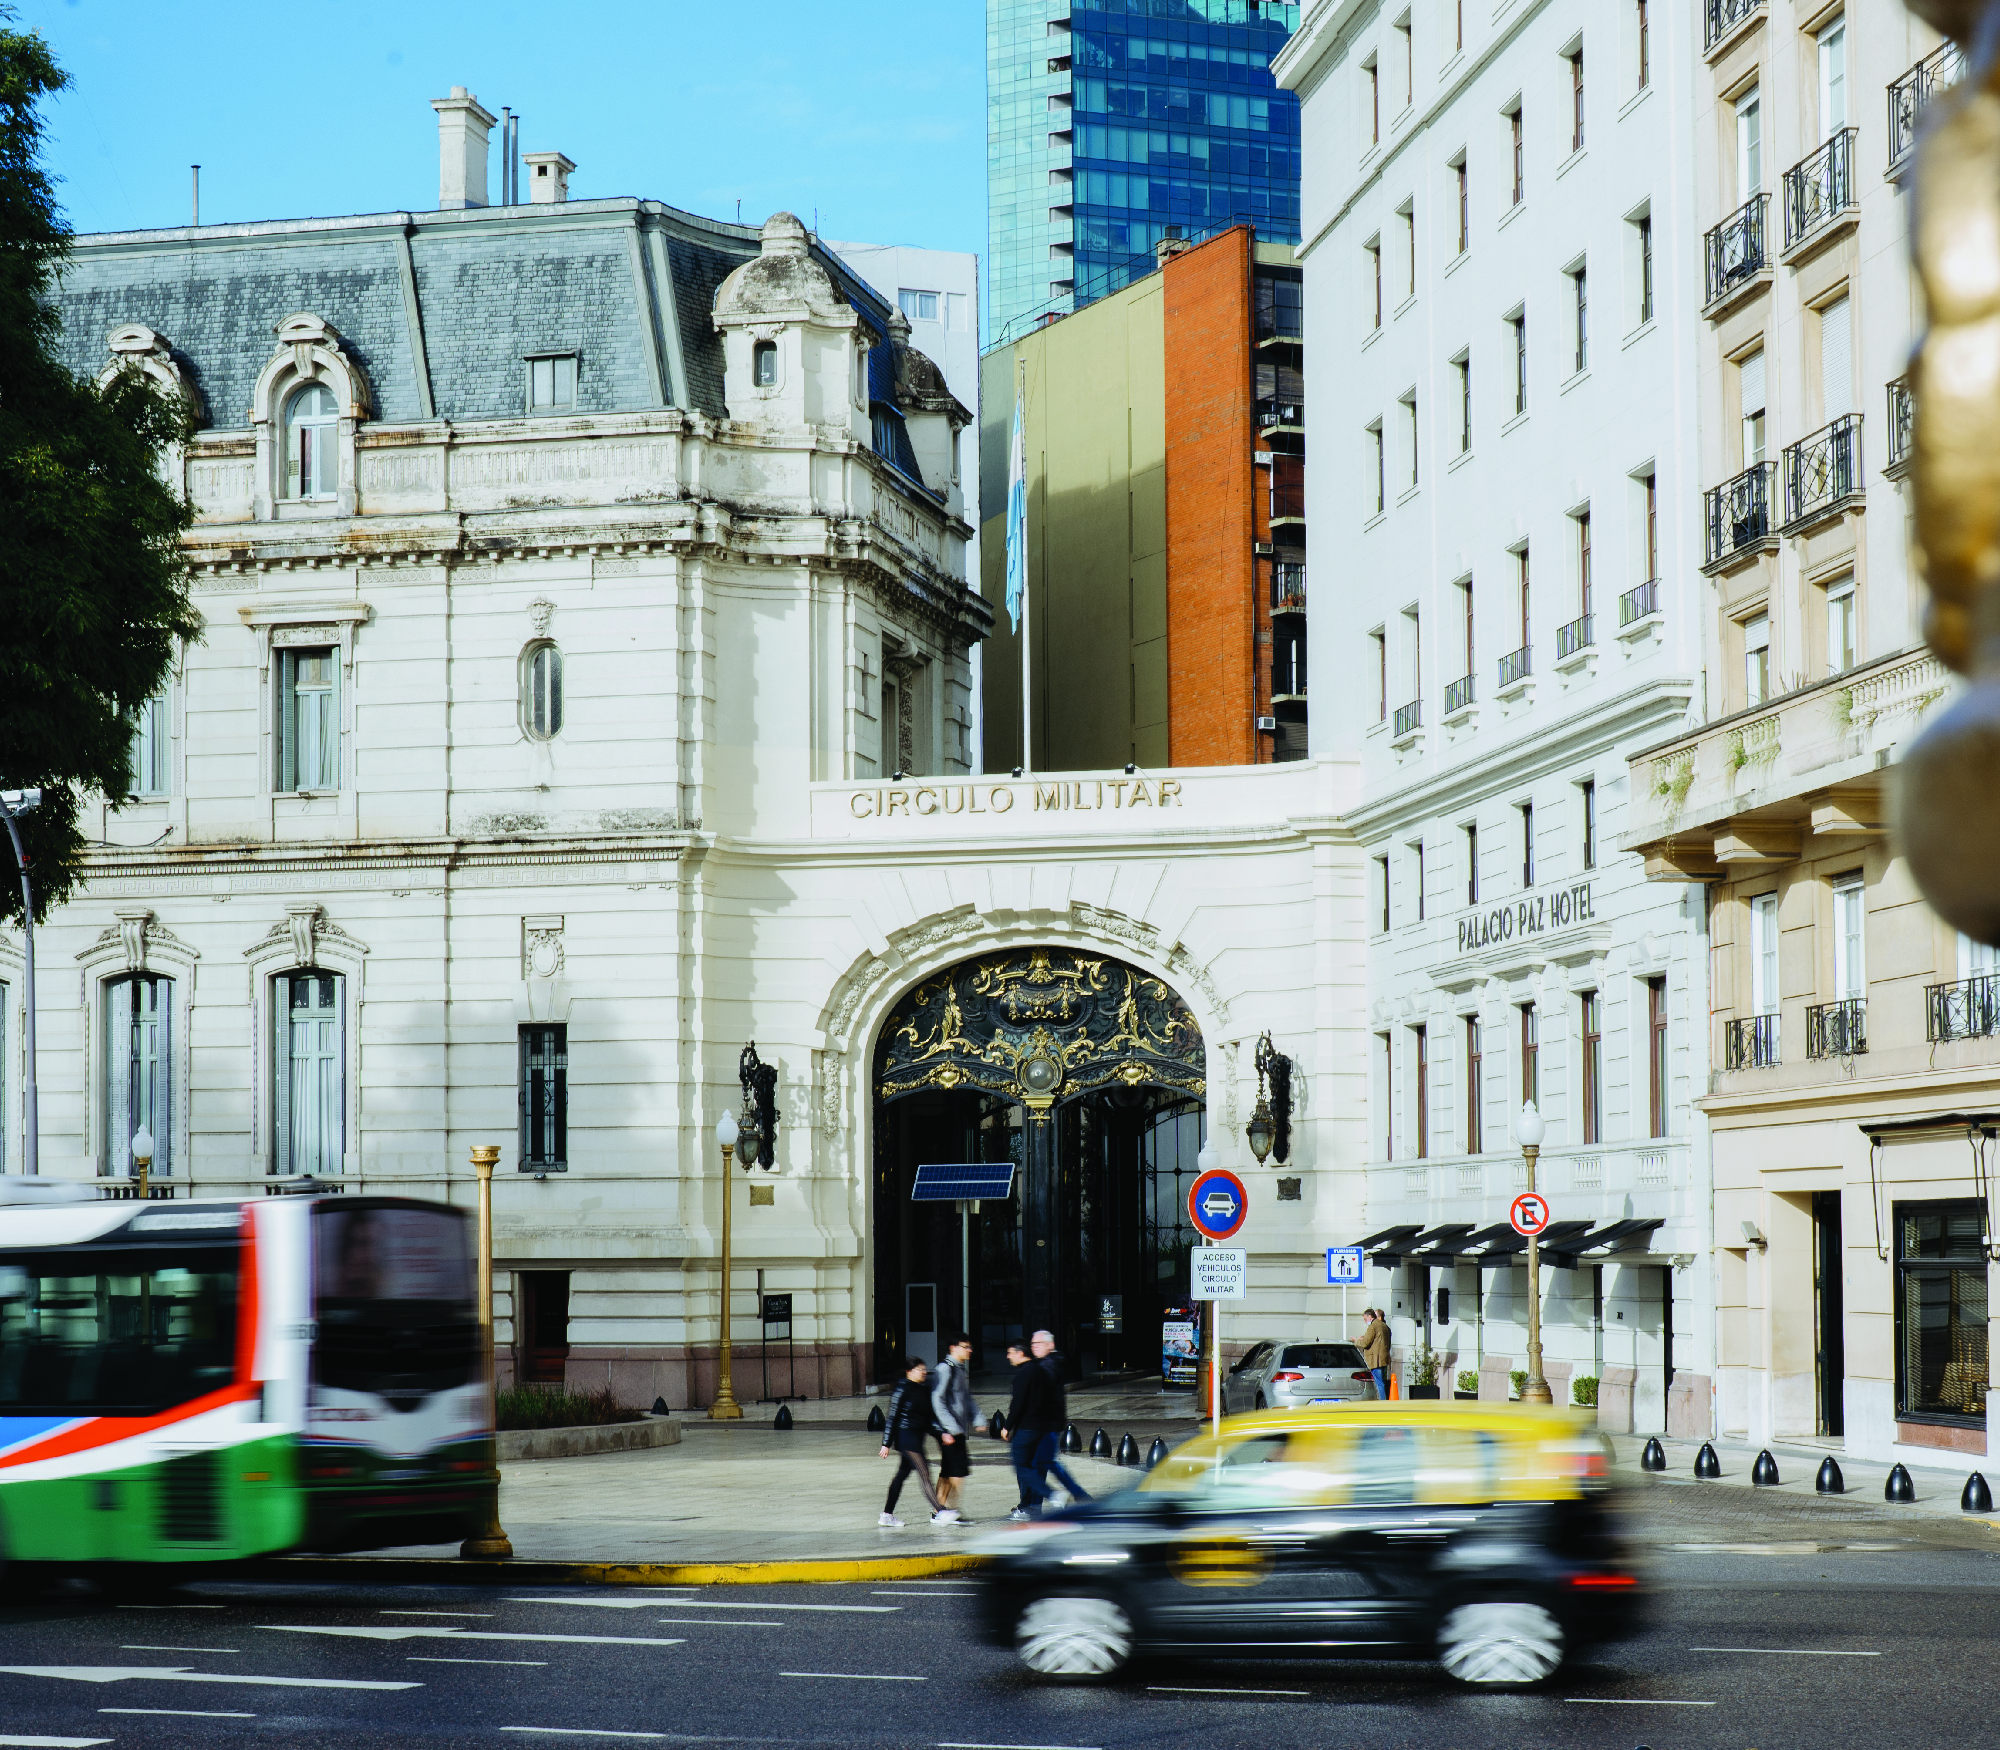 A busy street in front of the historic Círculo Militar building in Buenos Aires, Argentina. A car and bus are in motion and pedestrians cross the street.